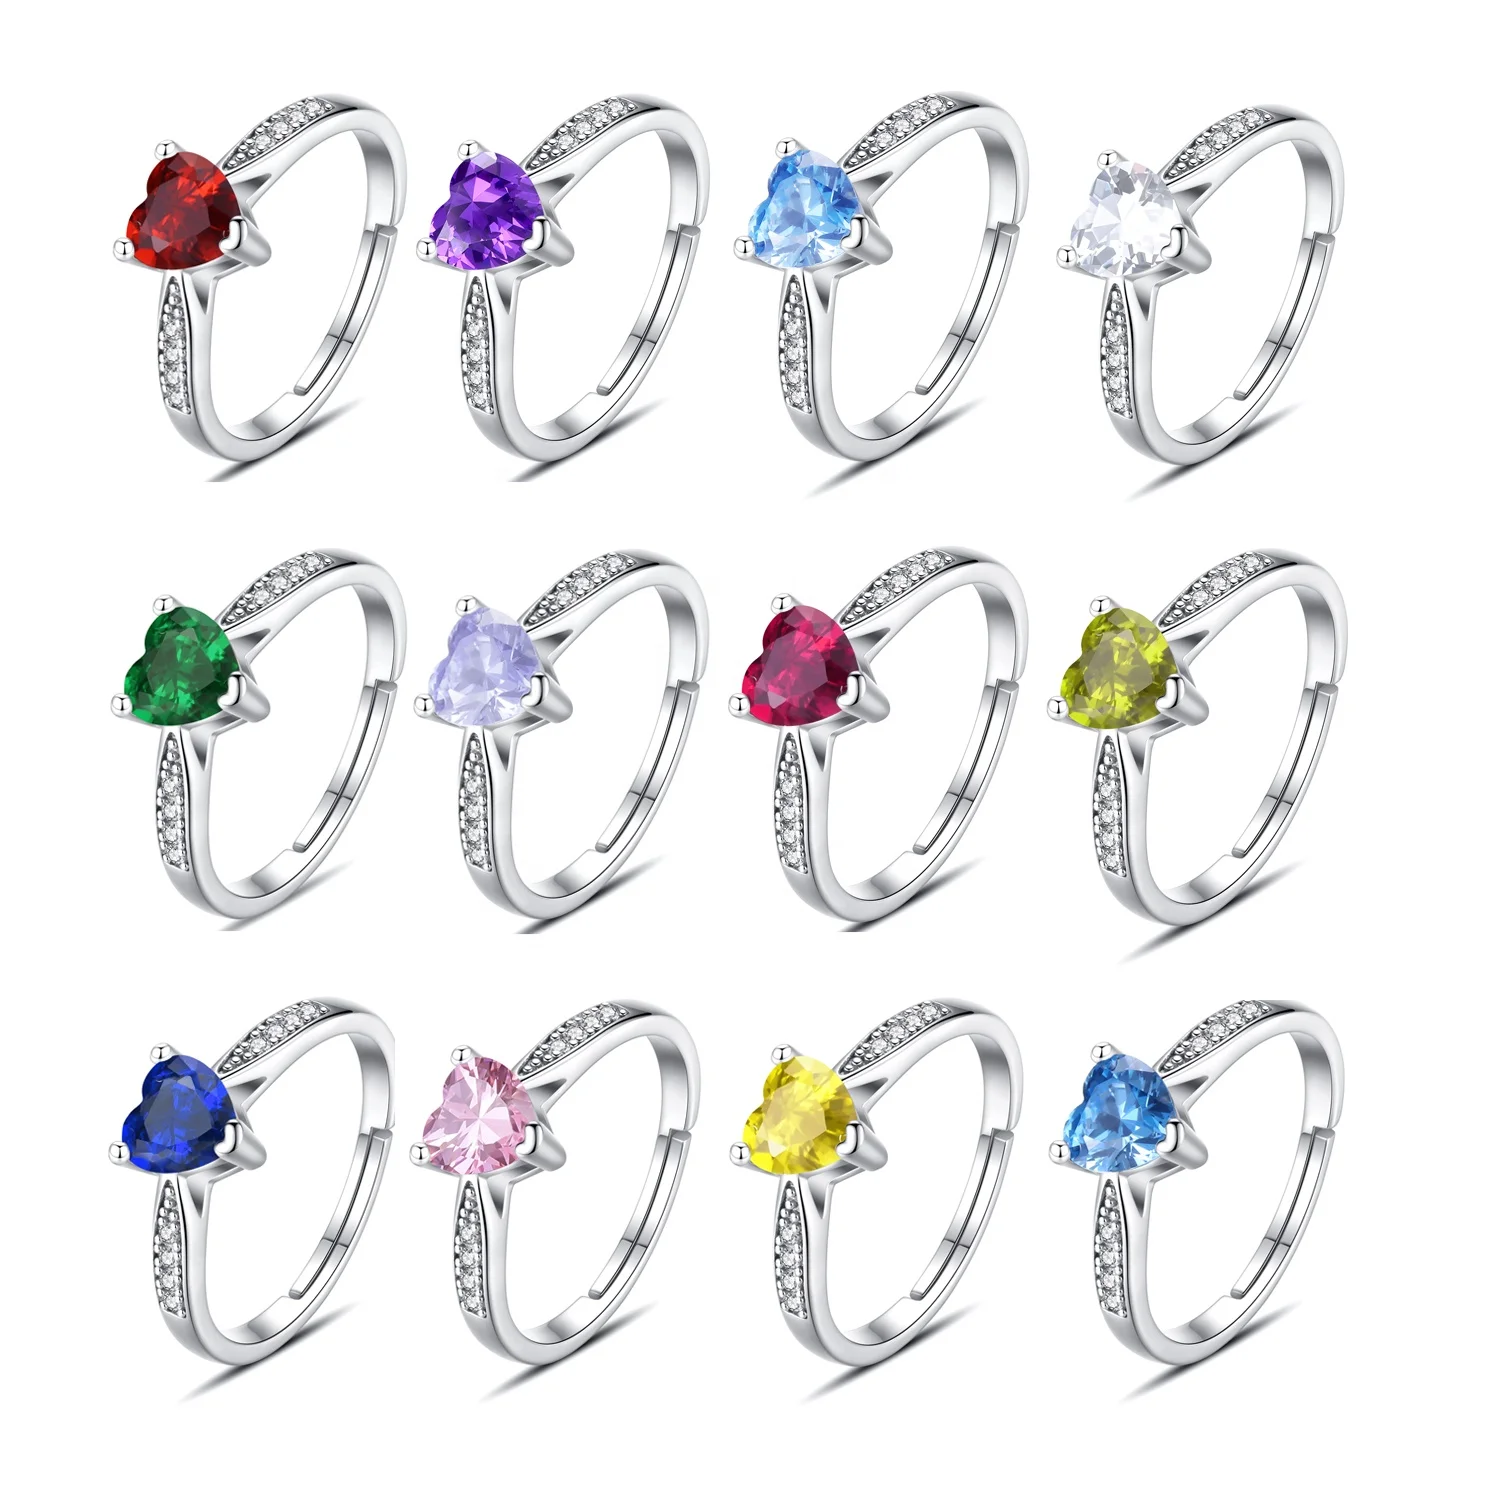 

Open adjustable size 925 sterling silver heart shaped birthstone cubic zirconia gemstone rings jewelry ring for women